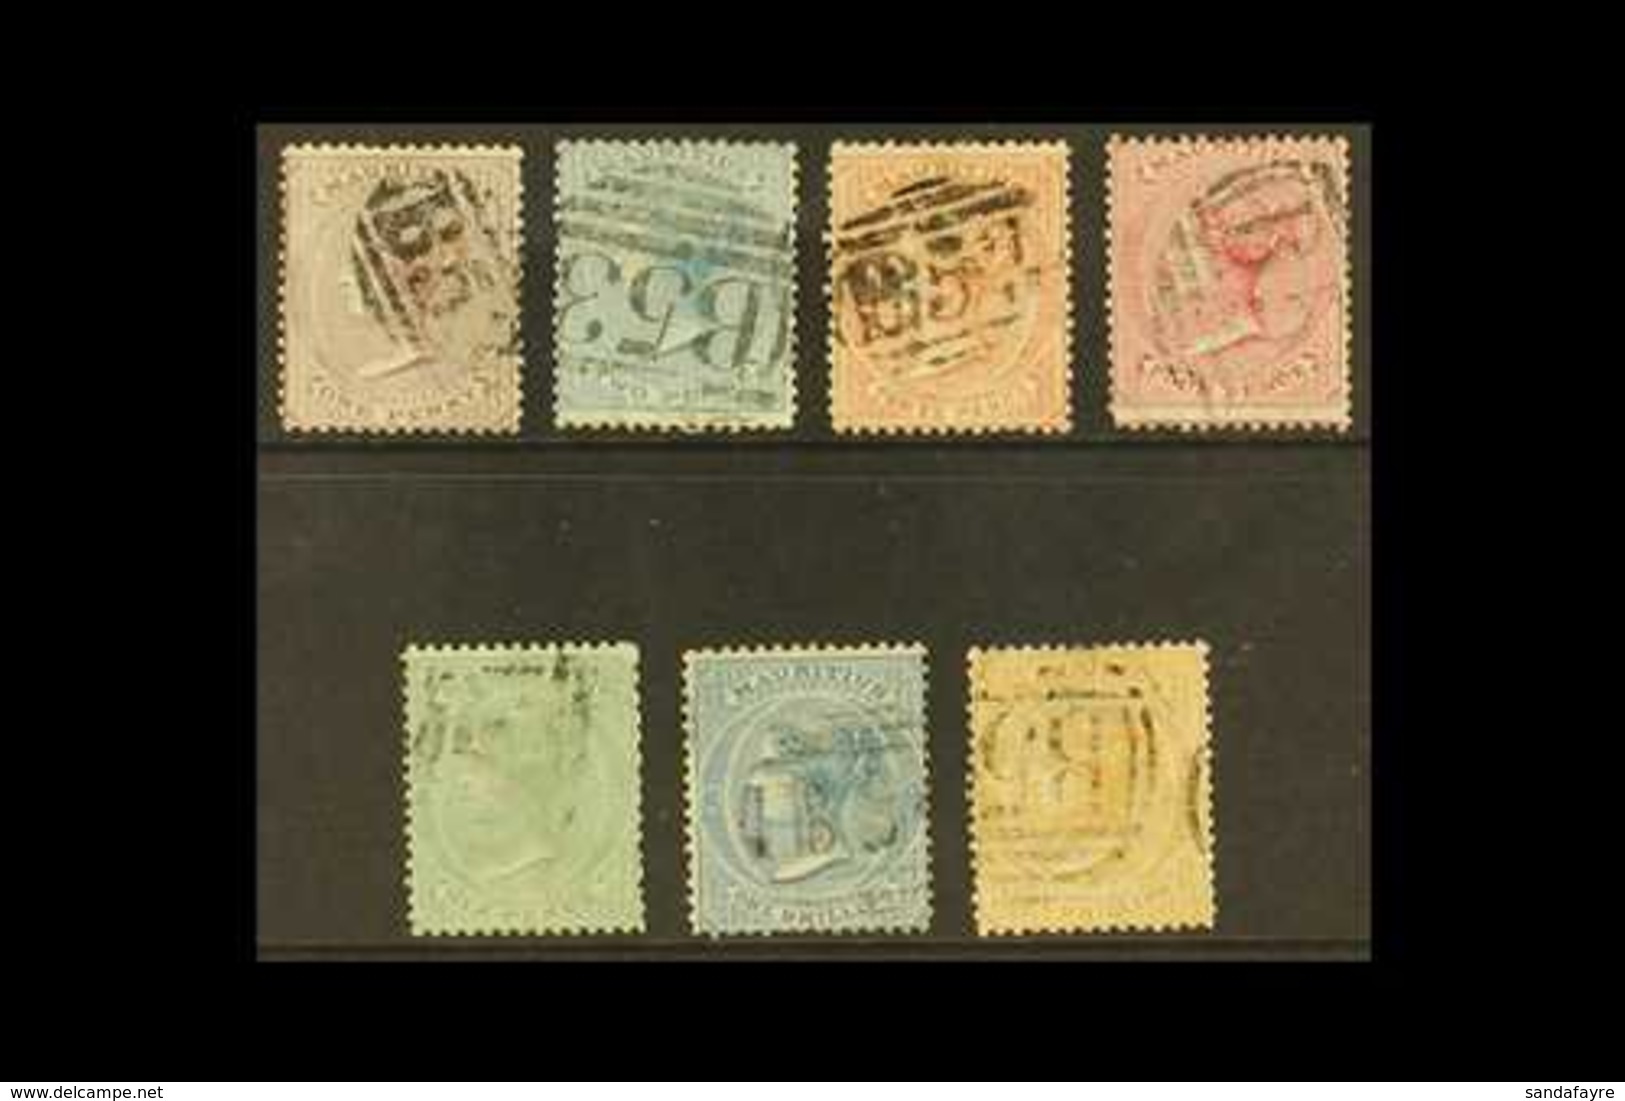 1863-72 GROUP Of Values To 1s Orange, Wmk Crown CC, SG 56, 59, 61a, 62, 65, 69, 70, Good To Fine Used (7 Stamps). For Mo - Mauritius (...-1967)